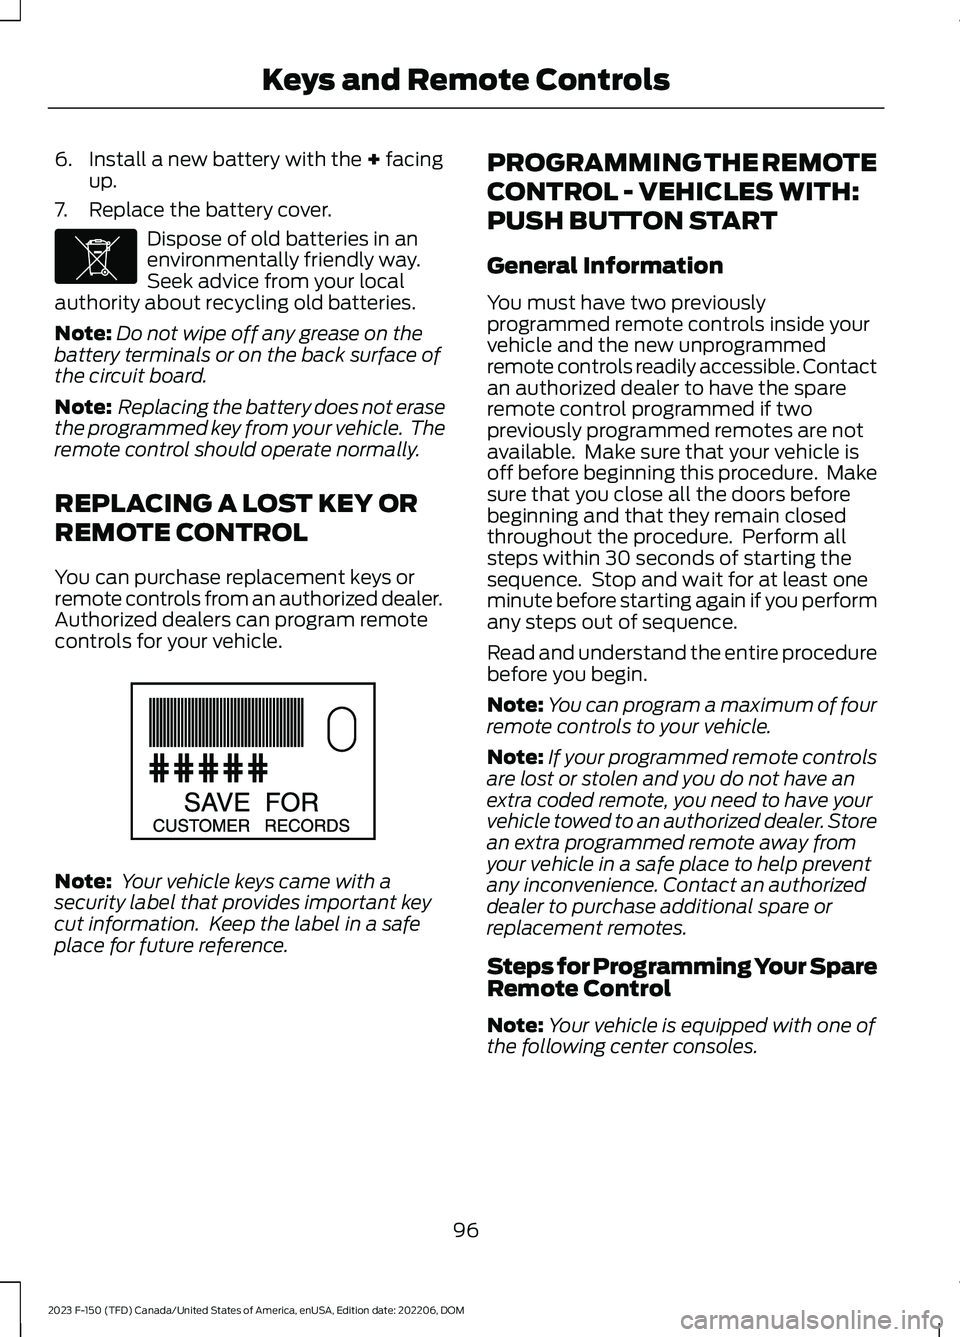 FORD F150 2023  Owners Manual 6.Install a new battery with the + facingup.
7.Replace the battery cover.
Dispose of old batteries in anenvironmentally friendly way.Seek advice from your localauthority about recycling old batteries.